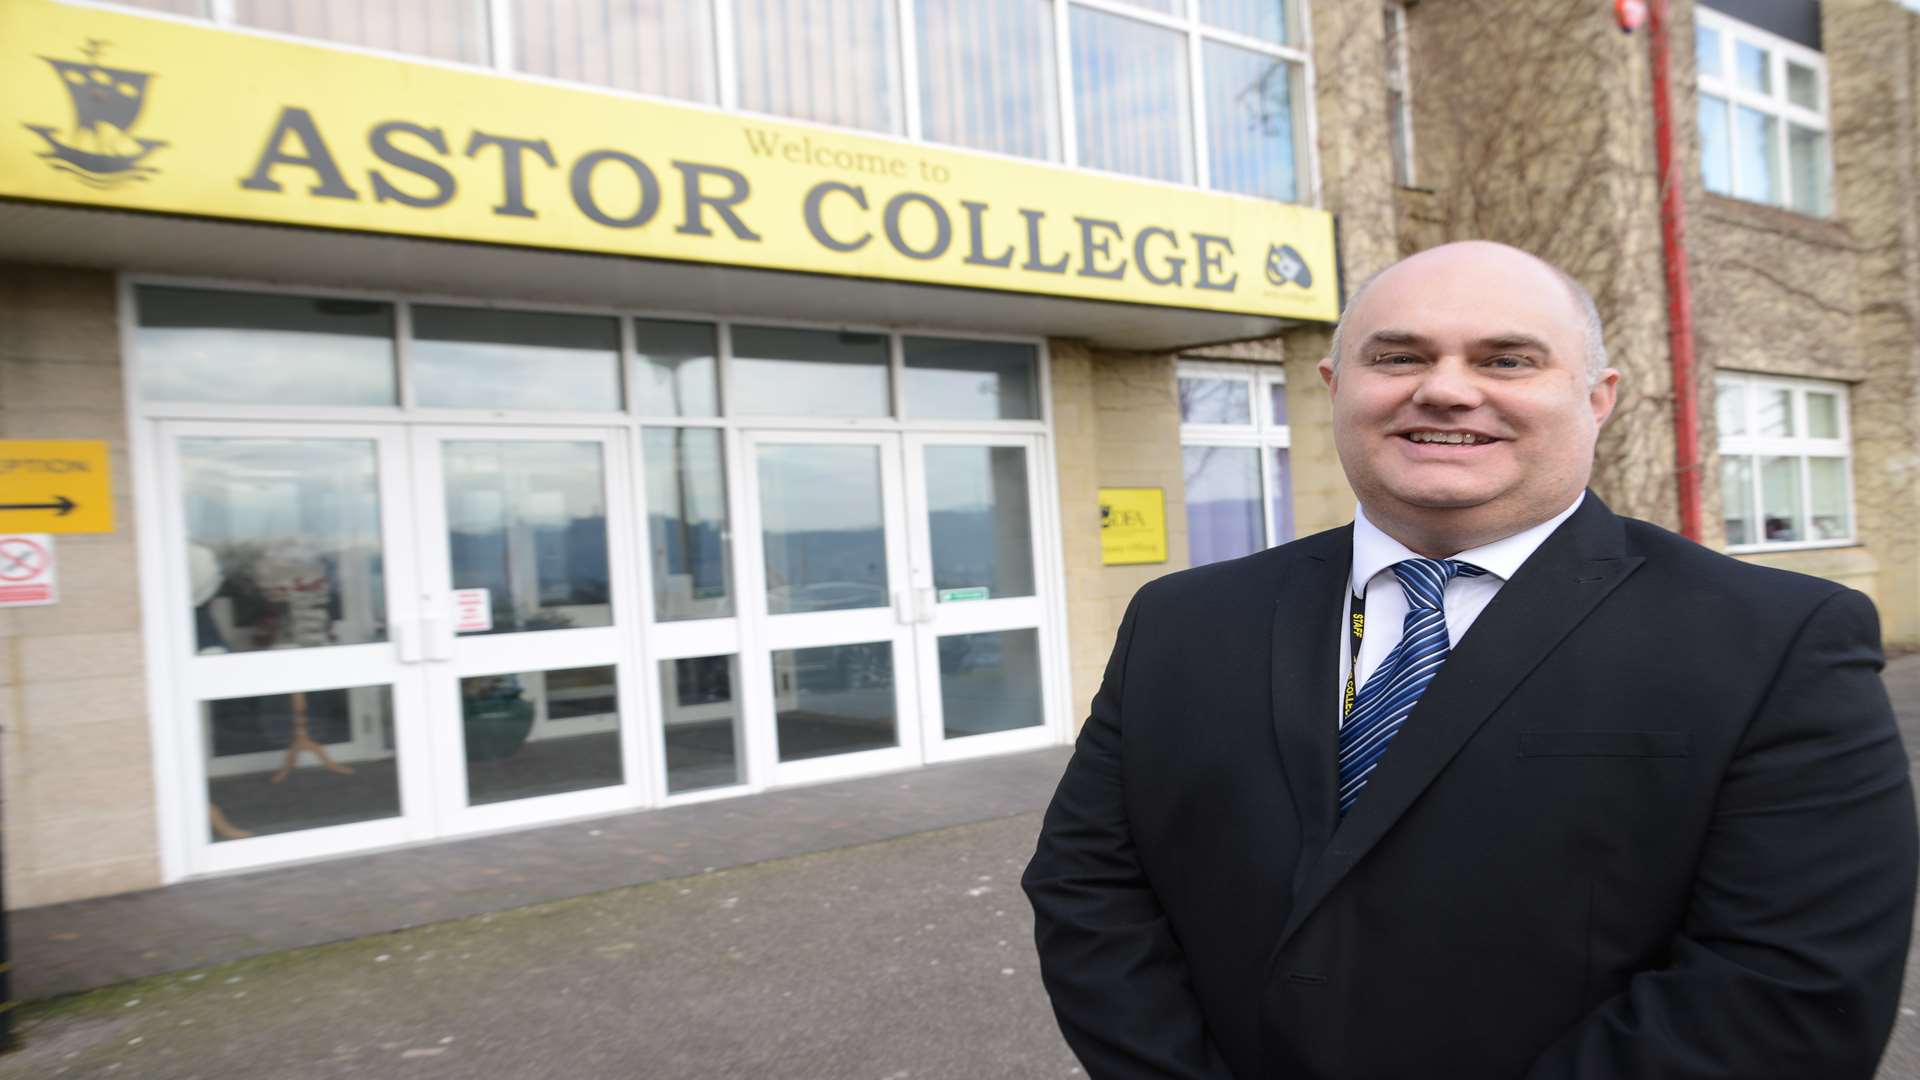 Lee Kane took on his role as head teacher at the school in January